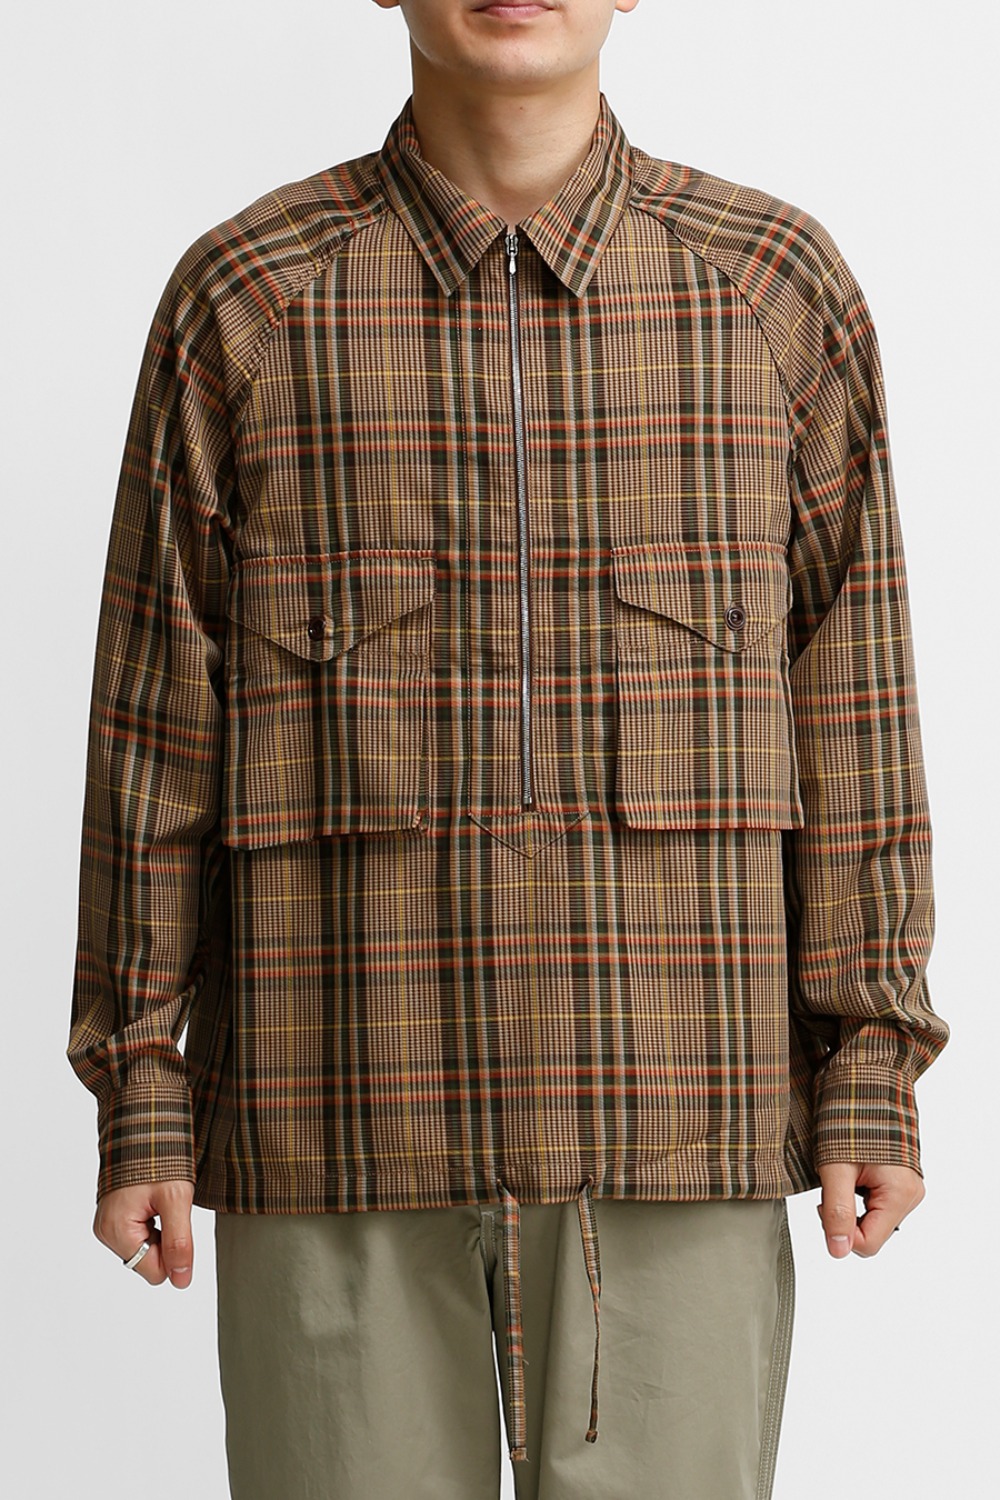 SCOUT PULLOVER SHIRT / BEIGE MULTI CHECK